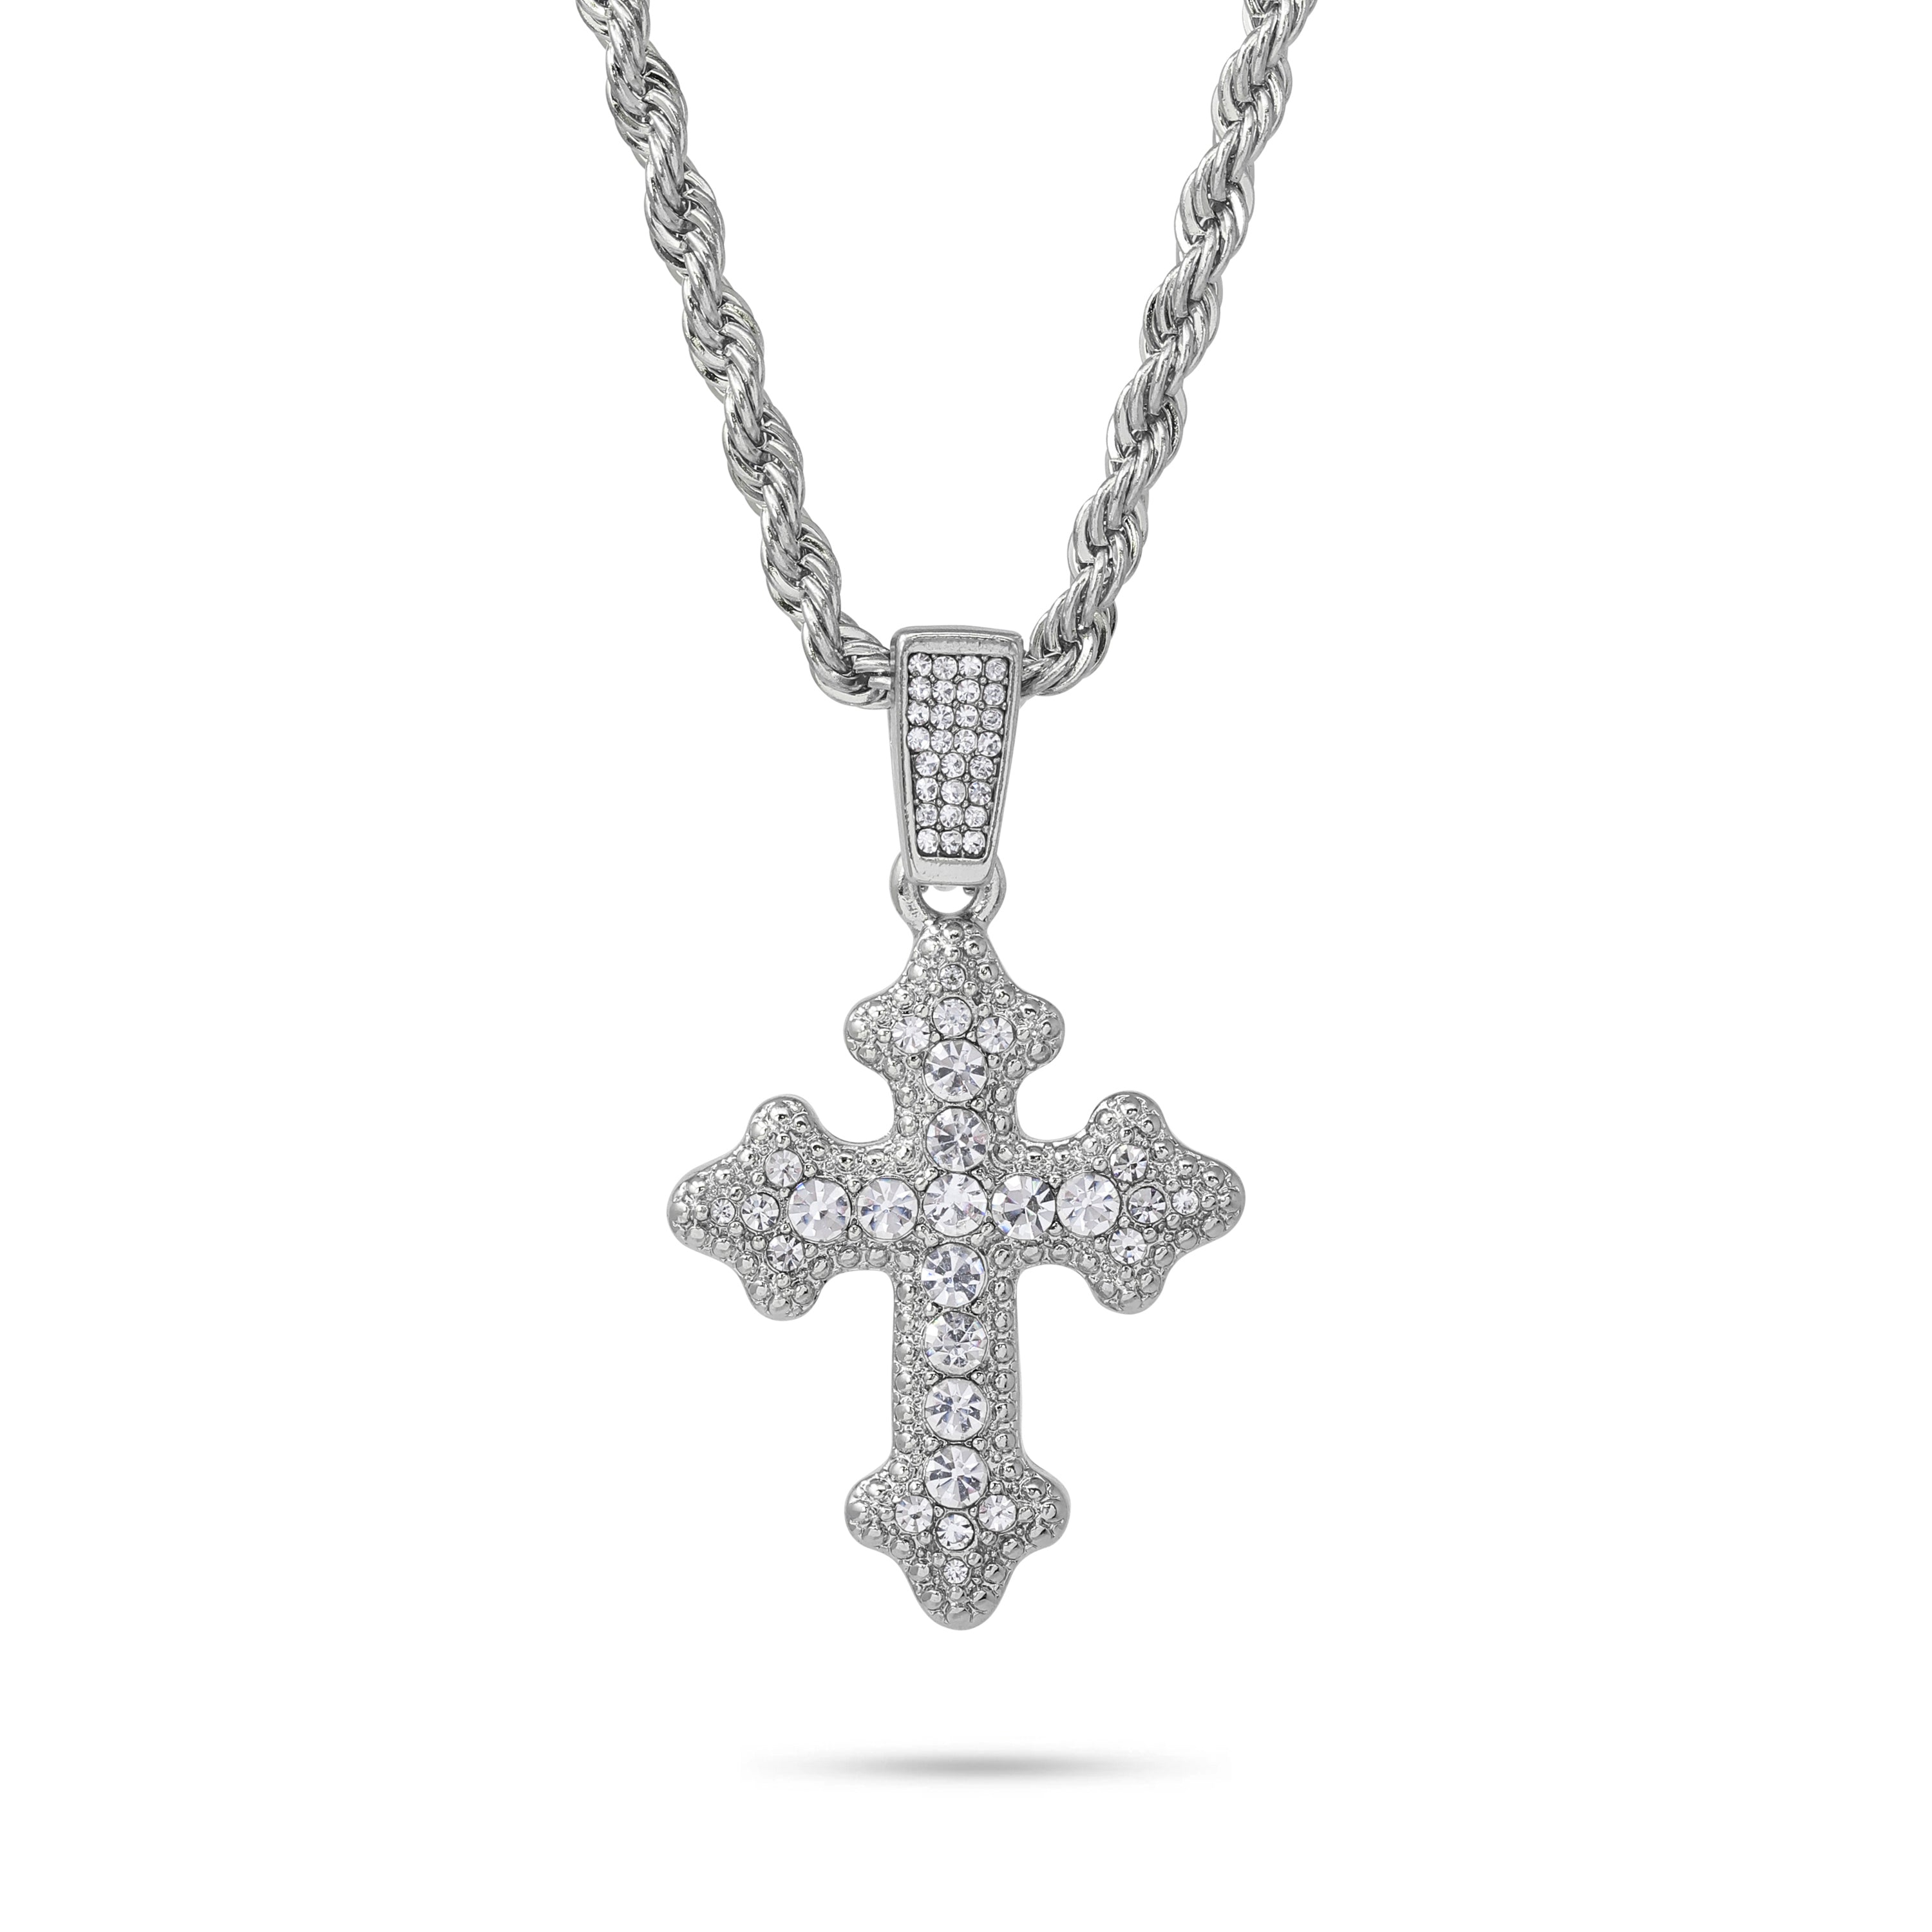 MEDIUM ICED GOTHIC CROSS NECKLACE SILVER